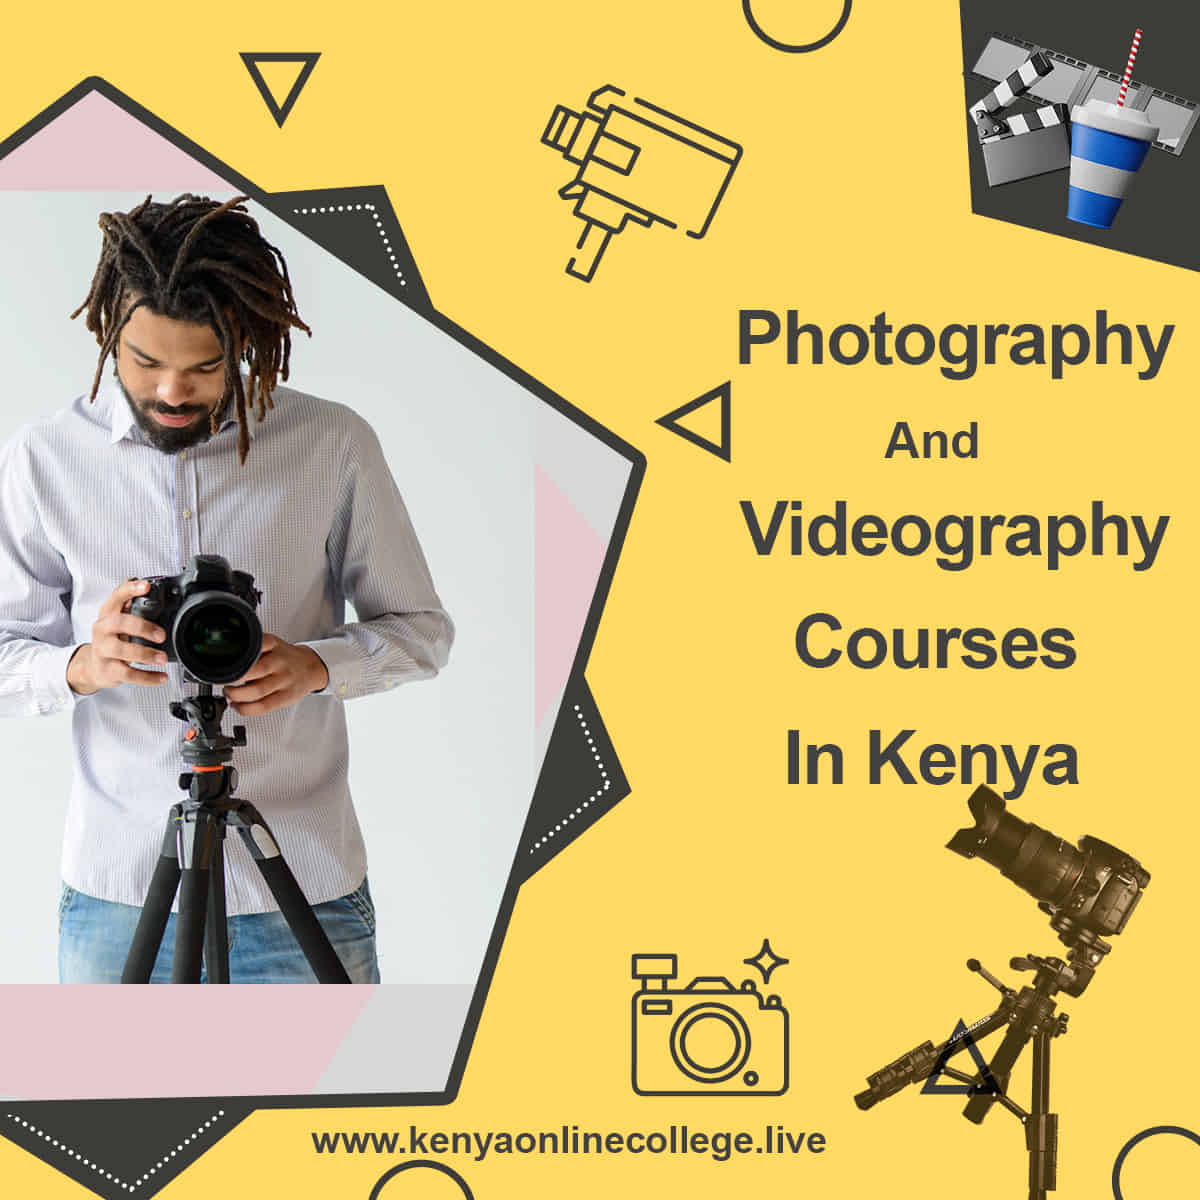 Photography and videography courses in Kenya